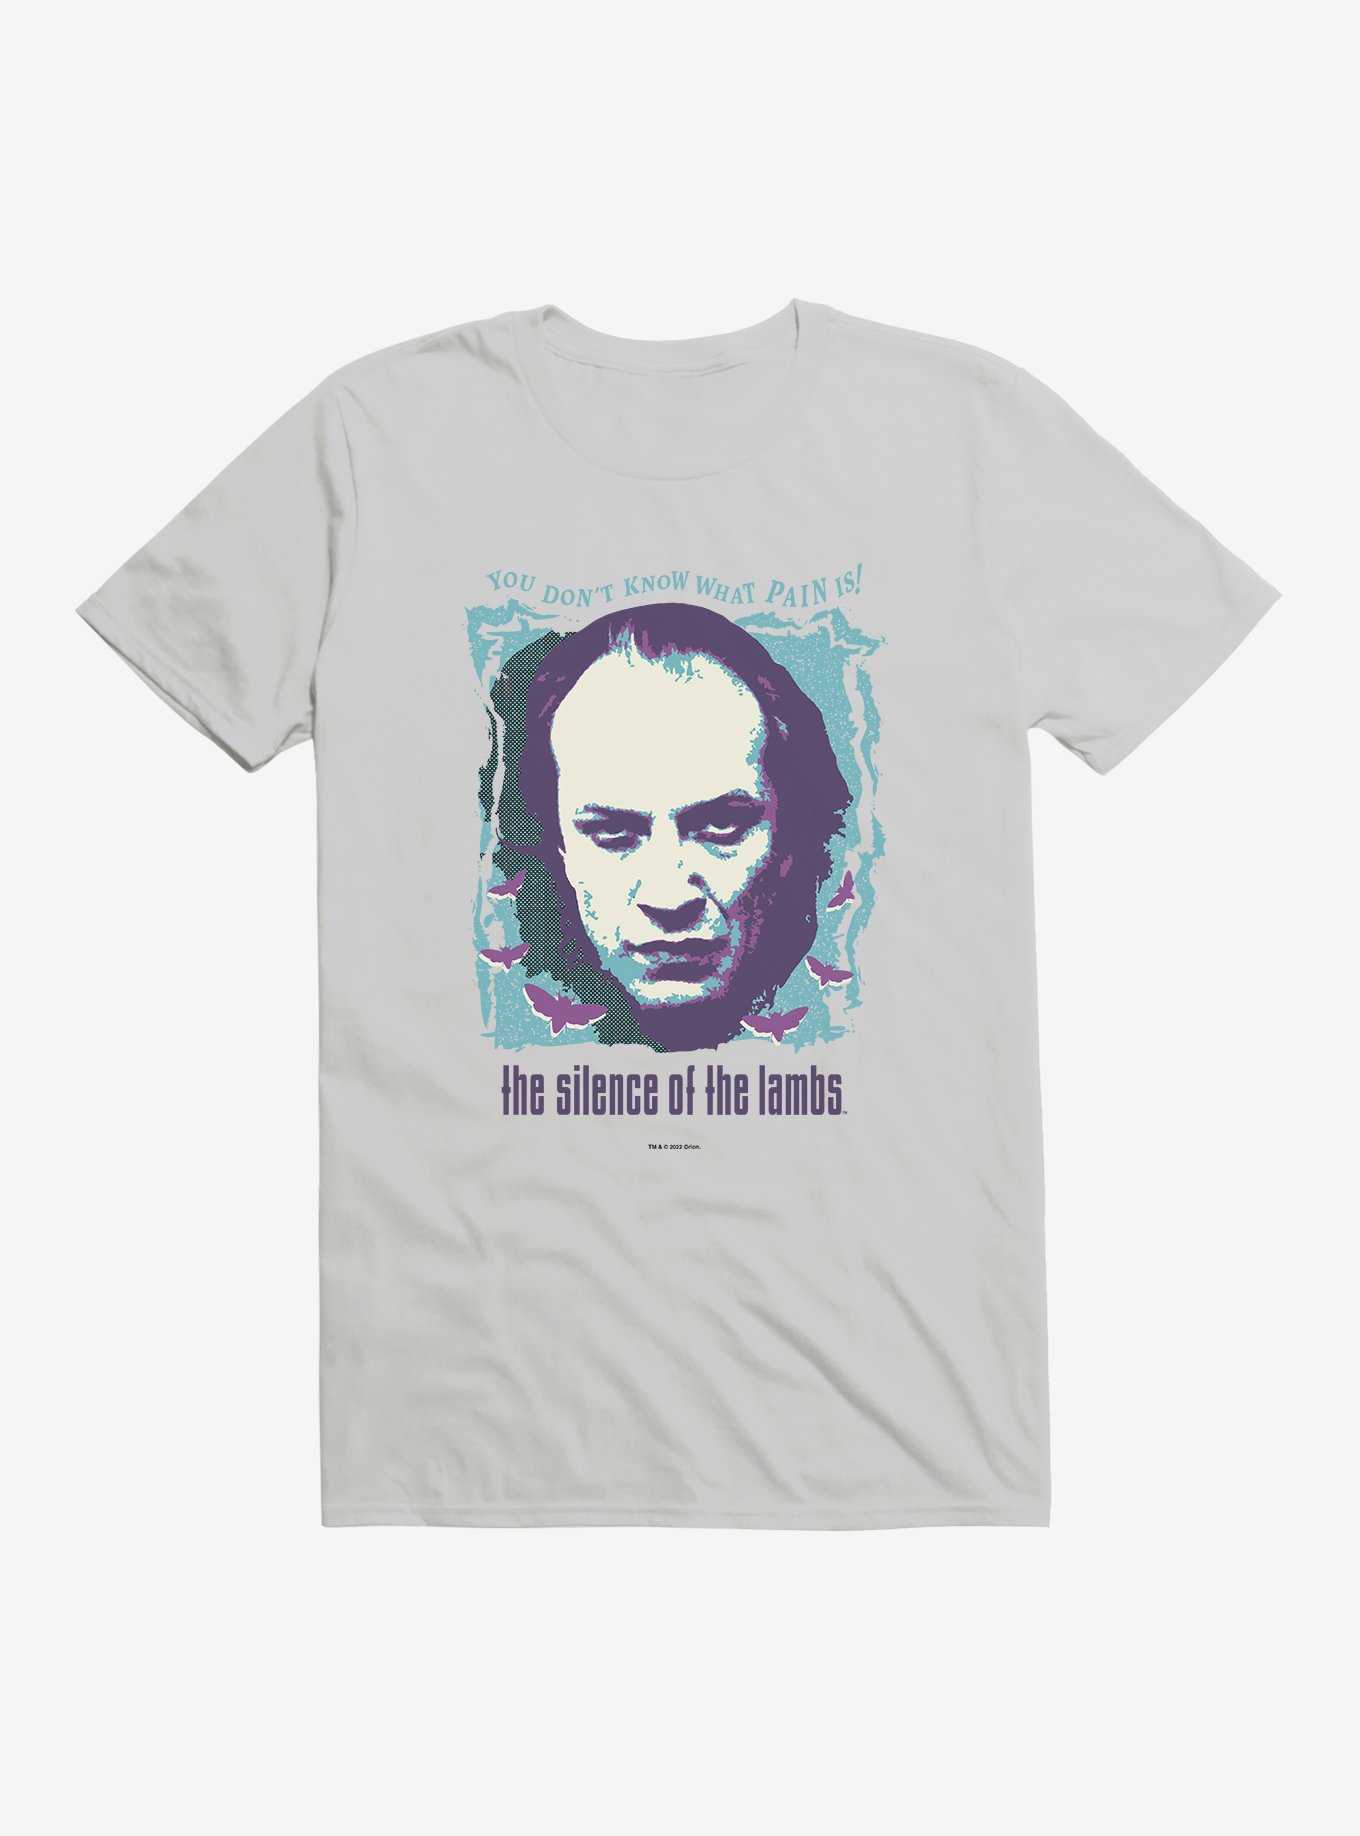 The Silence Of The Lambs What Pain Is! T-Shirt, , hi-res